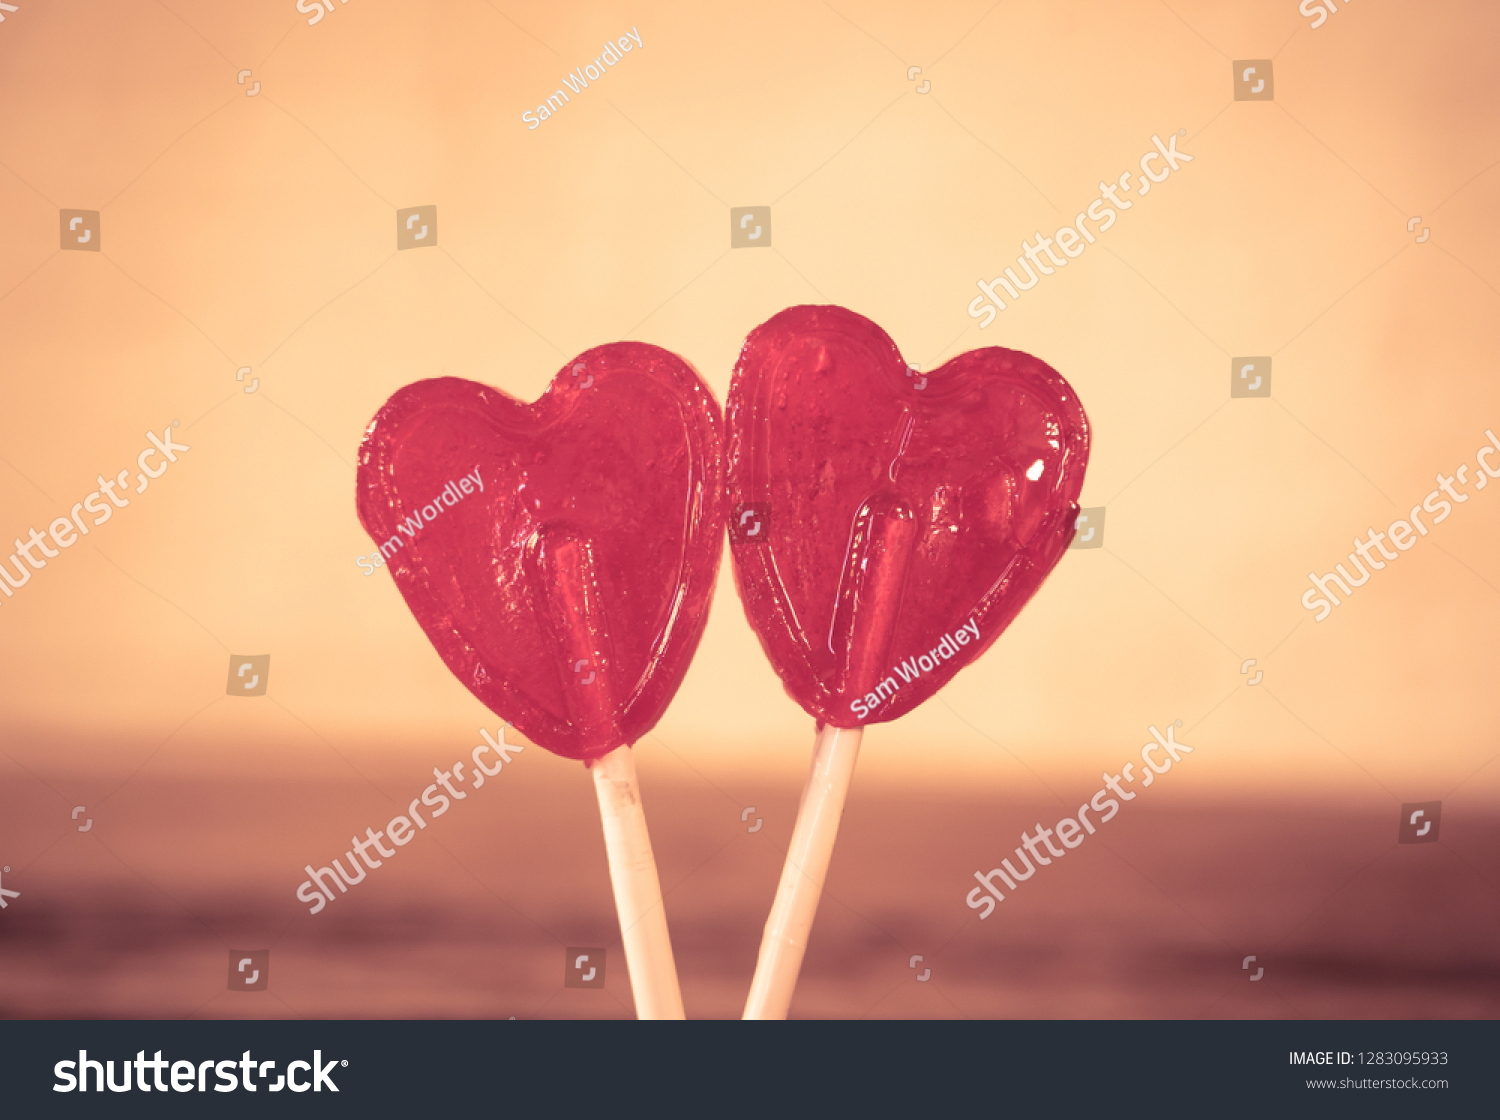 Two cute red heart shaped lollipops on rustic wooden table and beautiful romantic mood light and blur background as metaphor of love, togetherness and Valentines day greetings car design concept. #1283095933